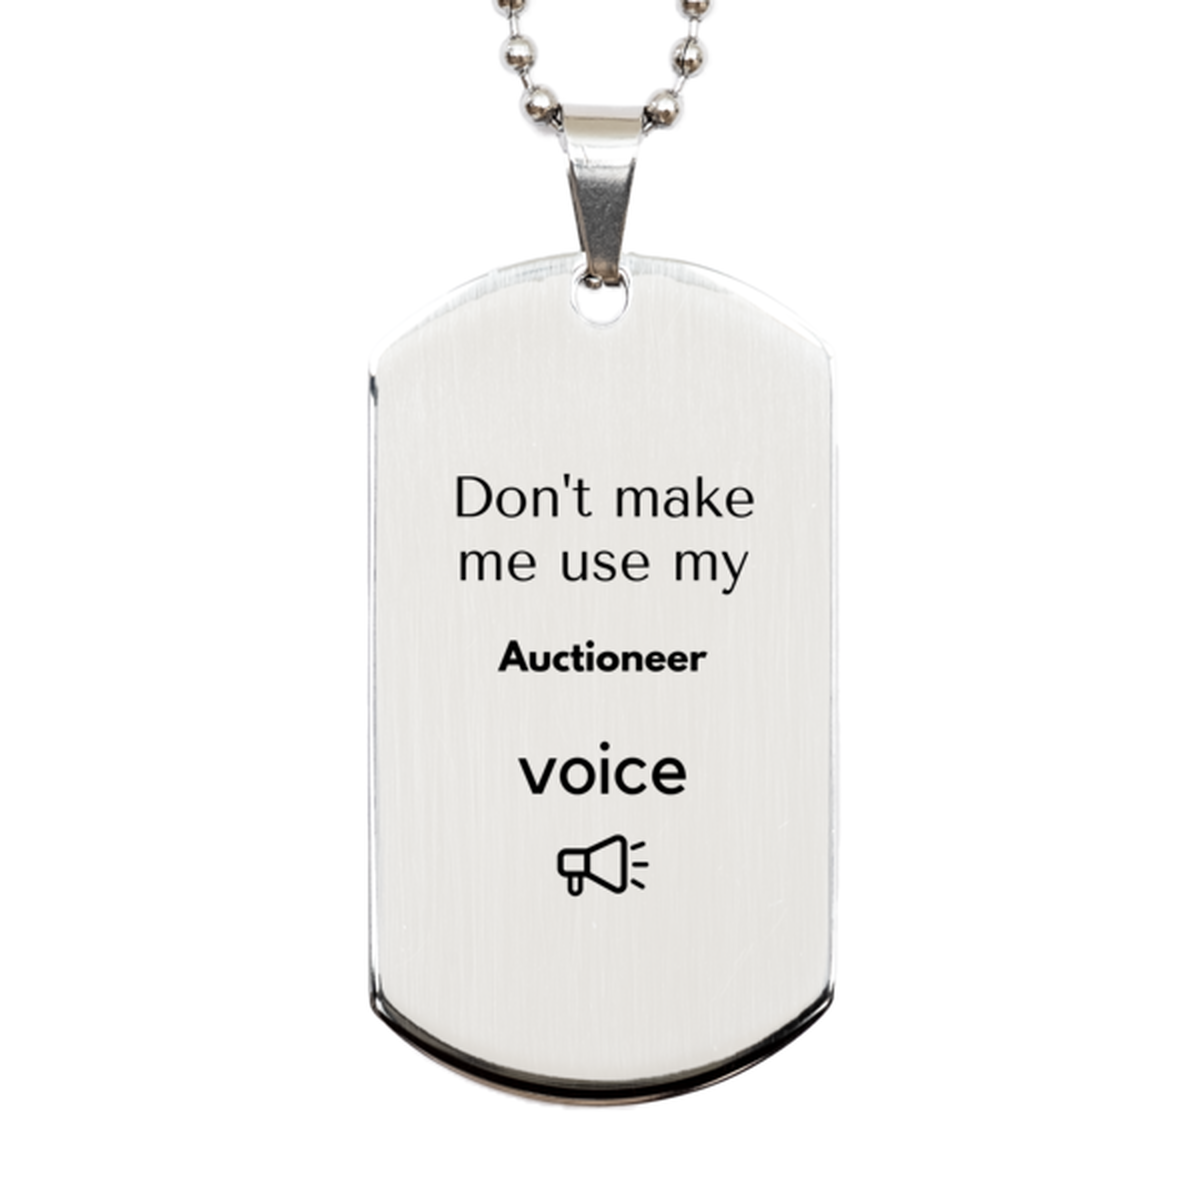 Don't make me use my Auctioneer voice, Sarcasm Auctioneer Gifts, Christmas Auctioneer Silver Dog Tag Birthday Unique Gifts For Auctioneer Coworkers, Men, Women, Colleague, Friends